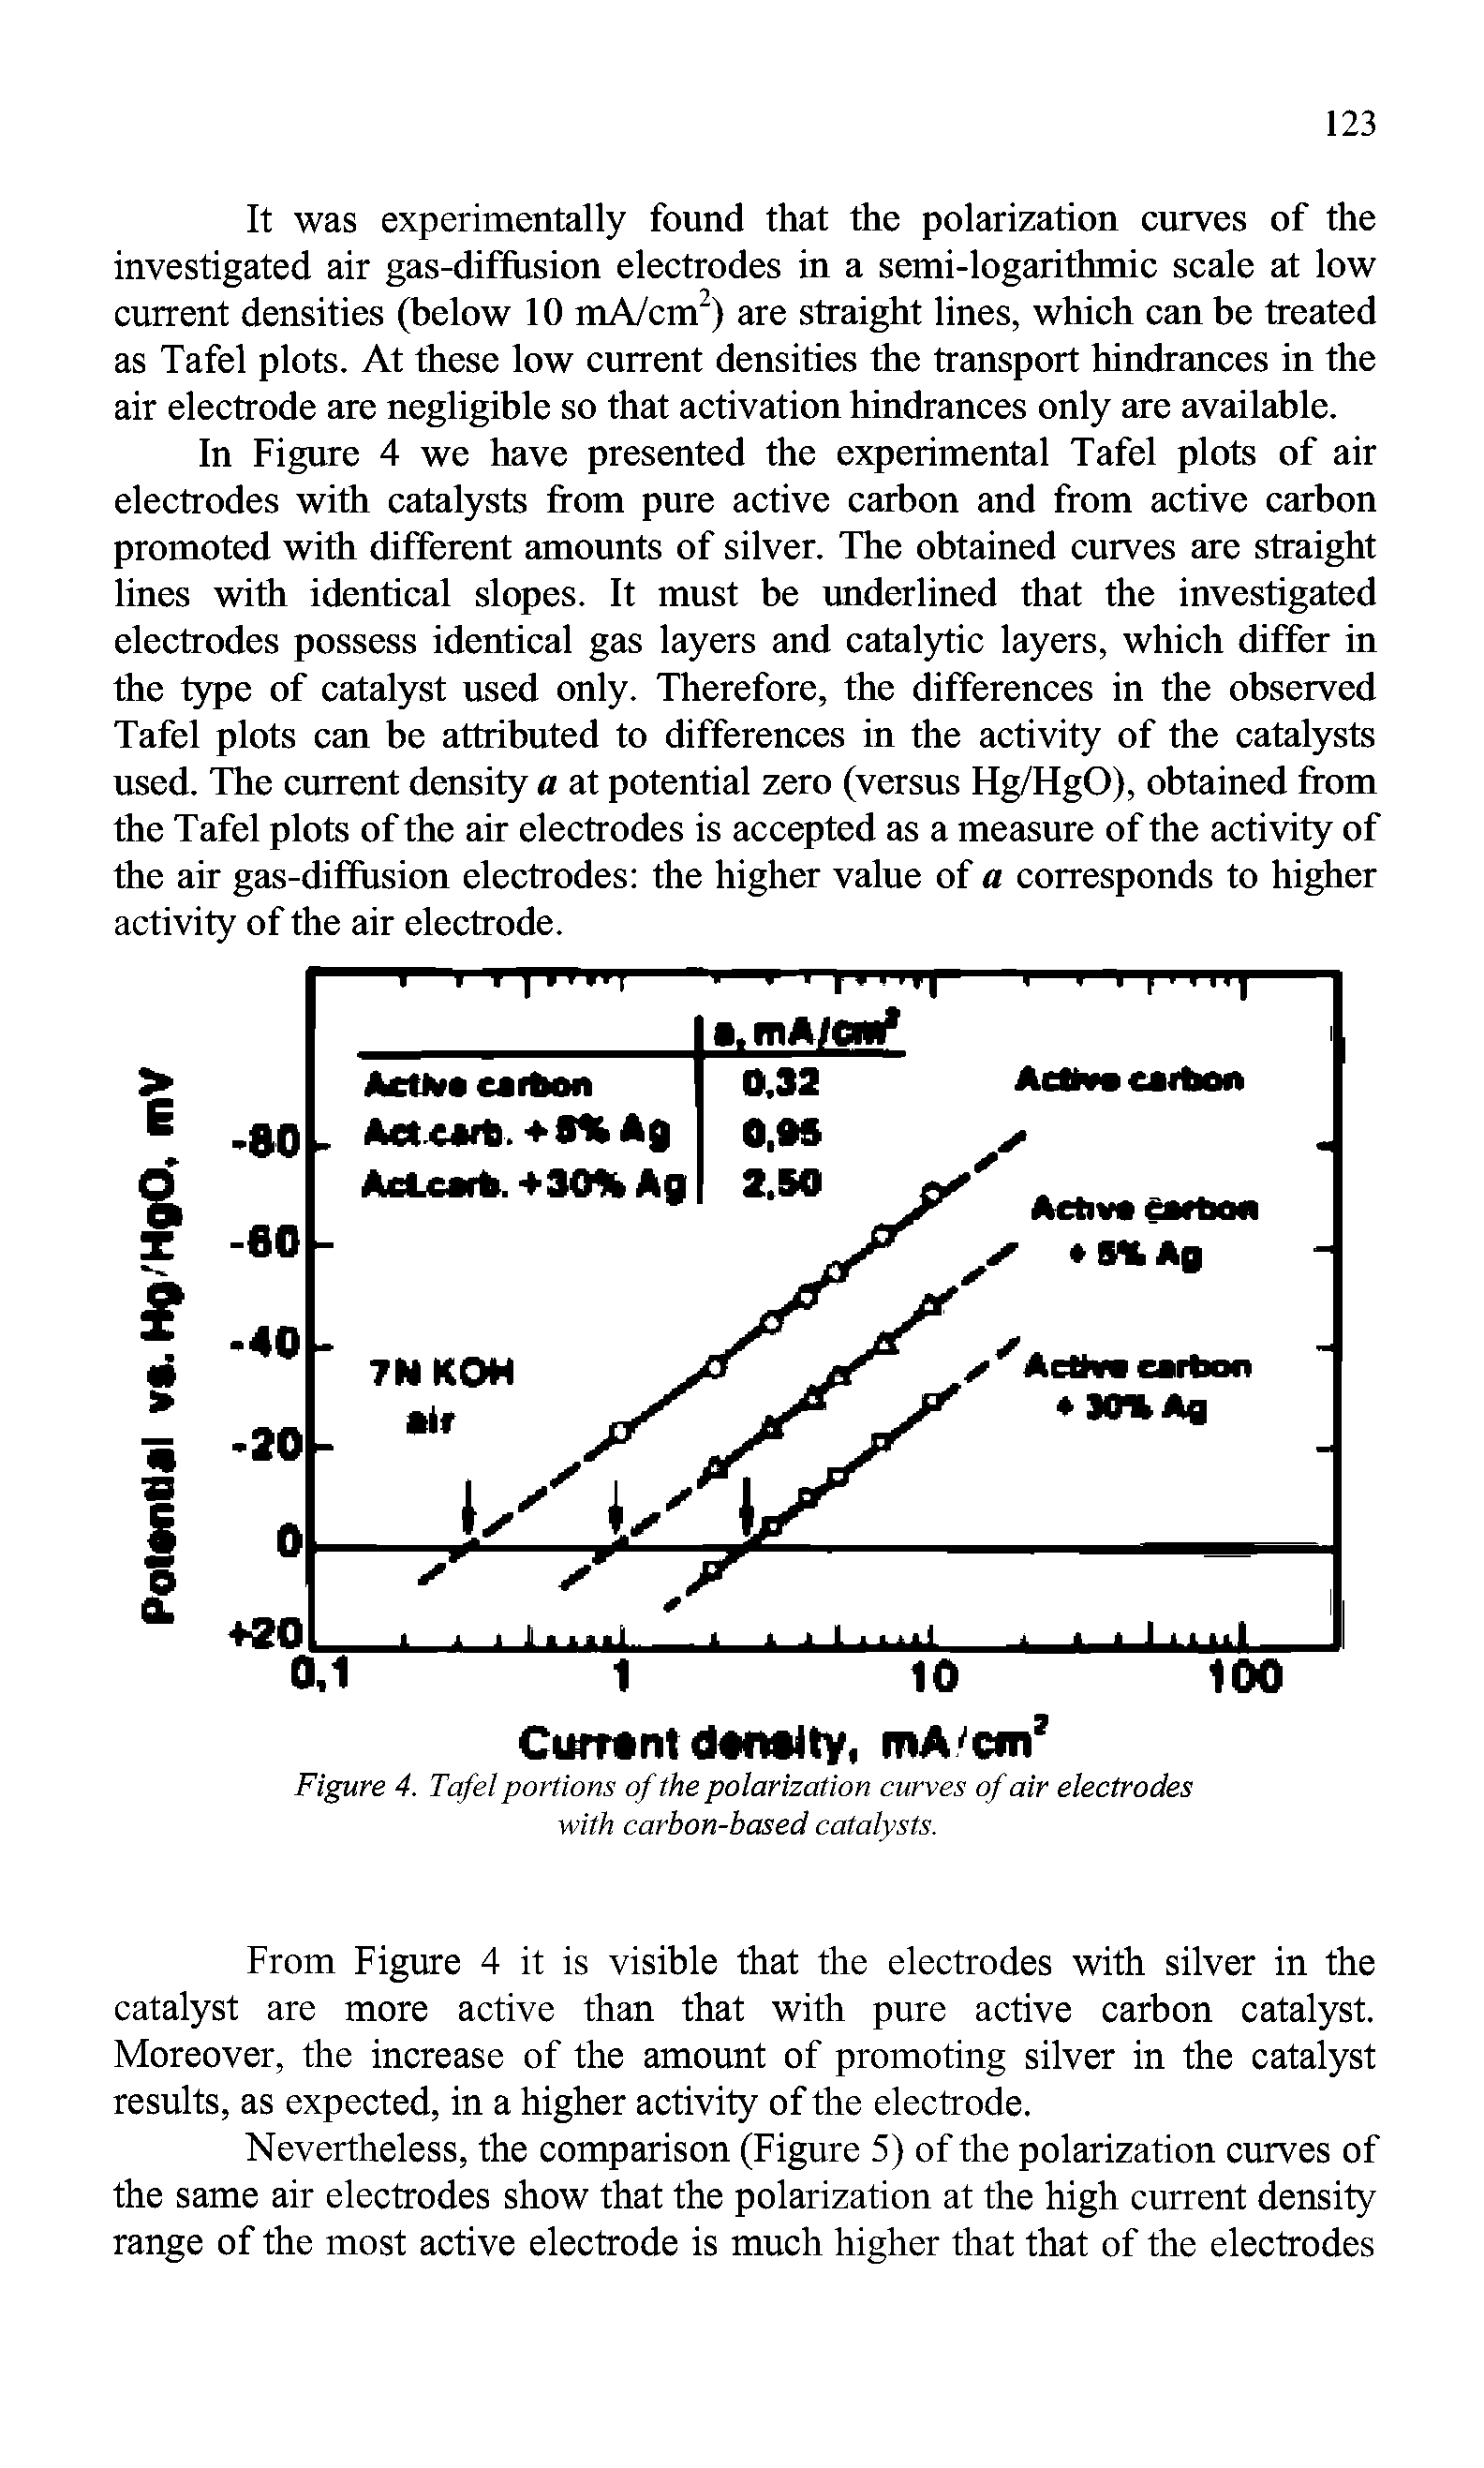 Figure 4. Tafel portions of the polarization curves of air electrodes with carbon-based catalysts.